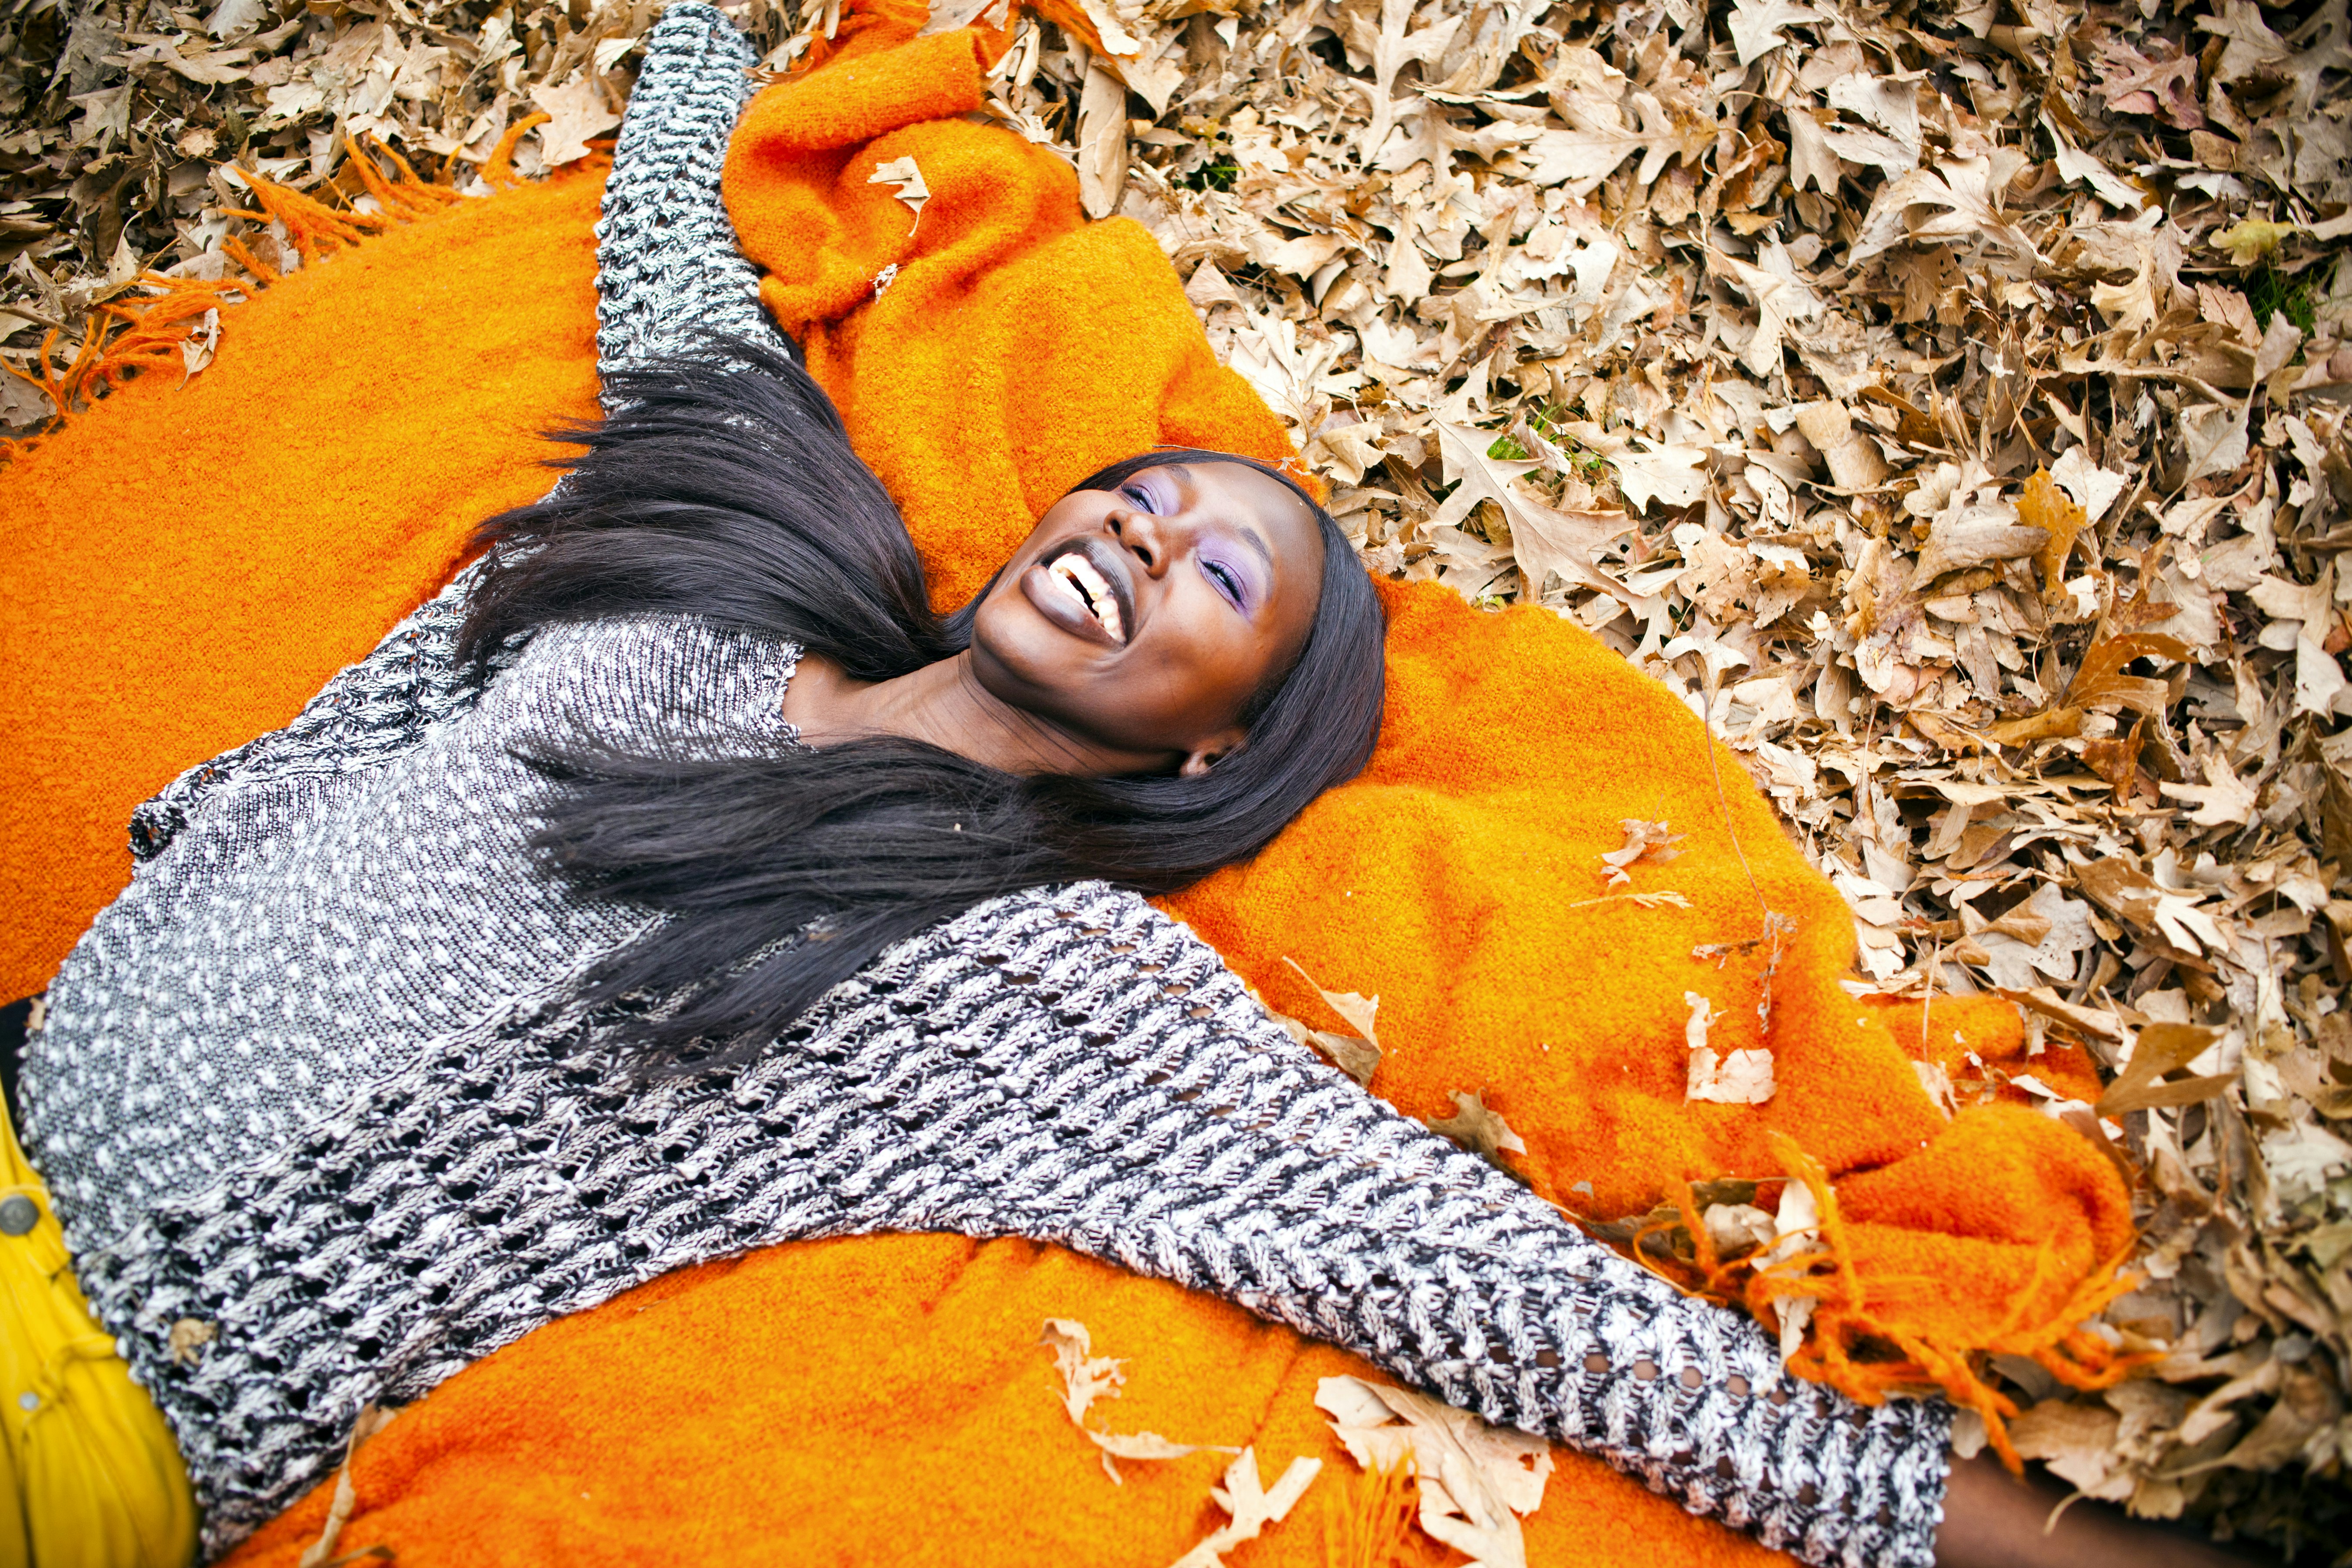 A woman in a black and white sweater and yellow pants lays on a bright orange blanket. There is a pile of leaves beneath her. 